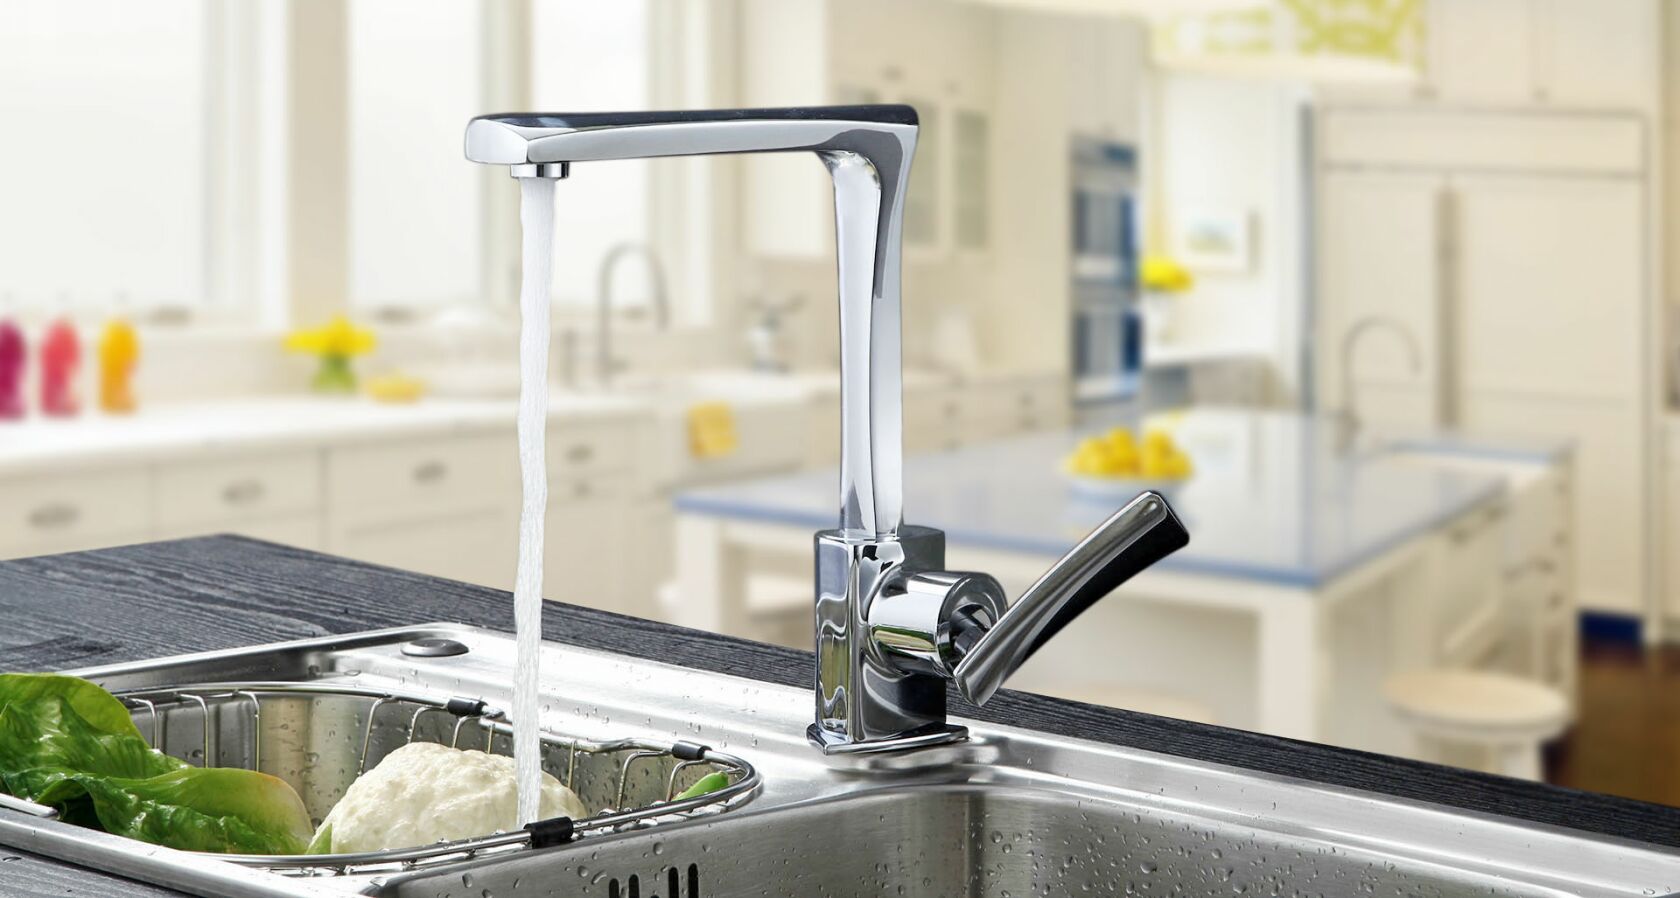 Federal Kitchen Faucet Yuhuan Federal Sanitary Ware Manufacture